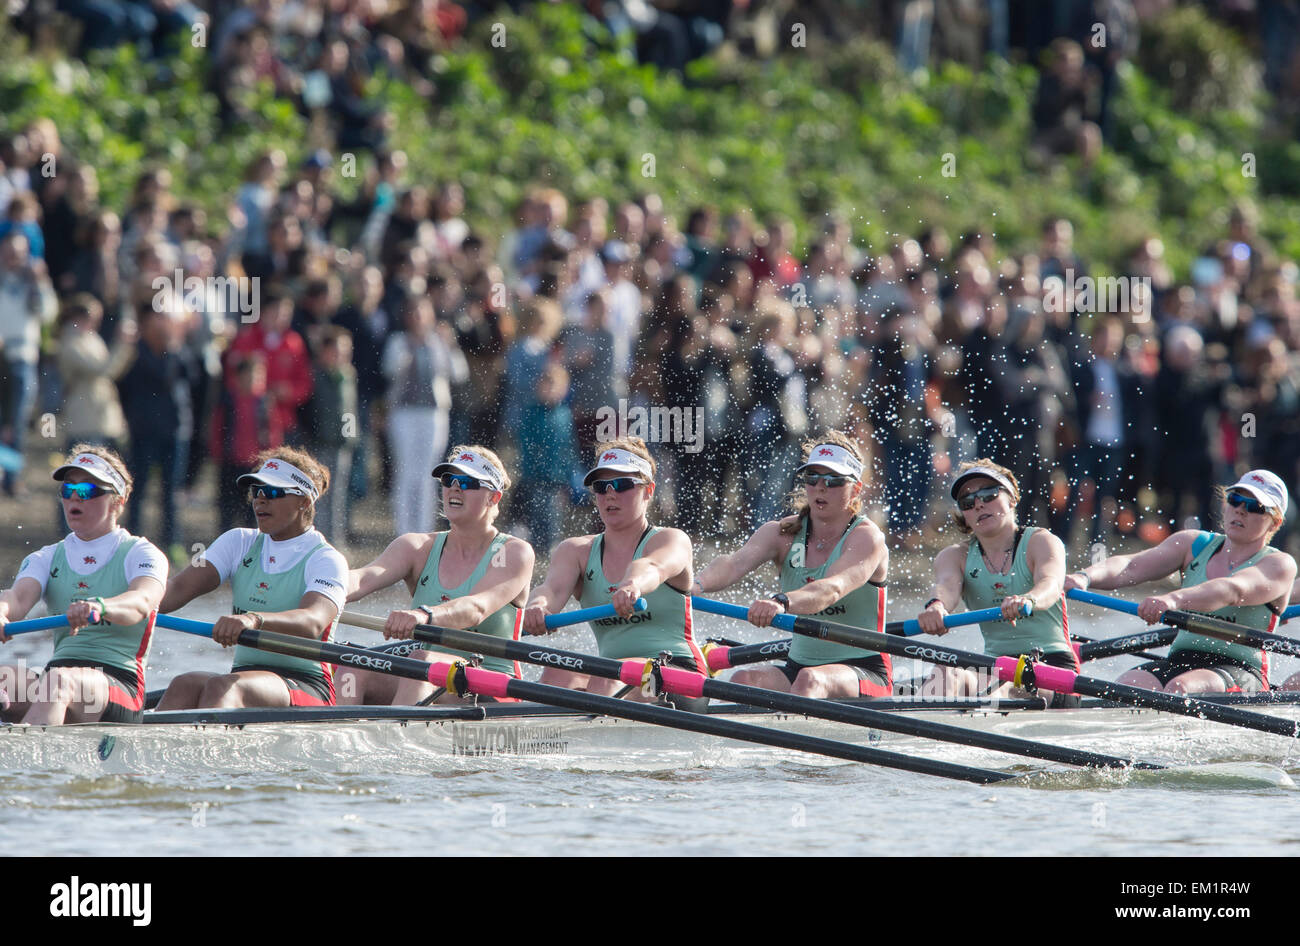 11.04.2015. Oxford University Women's Boat Club (OUWBC) [dark blue] and Cambridge University Women's Boat Club (CUWBC) [light blue] make history by competing in the first ever women’s race to be held on the traditional Men’s Tideway course between Putney and Mortlake.  OUWBC crew:- Bow: Maxie Scheske, 2: Anastasia Chitty, 3: Shelley Pearson, 4: Lauren Kedar, 5: Maddy Badcott, 6: Emily Reynolds, 7: Nadine Graedel Iberg, Stroke: Caryn Davies, Cox: Jennifer Her.  CUWBC crew:- Bow: Fanny Belais, 2: Ashton Brown, 3: Caroline Reid, 4: Claire Watkins, 5: Melissa Wilson, 6: Holly Hill, 7: Daphne Marts Stock Photo